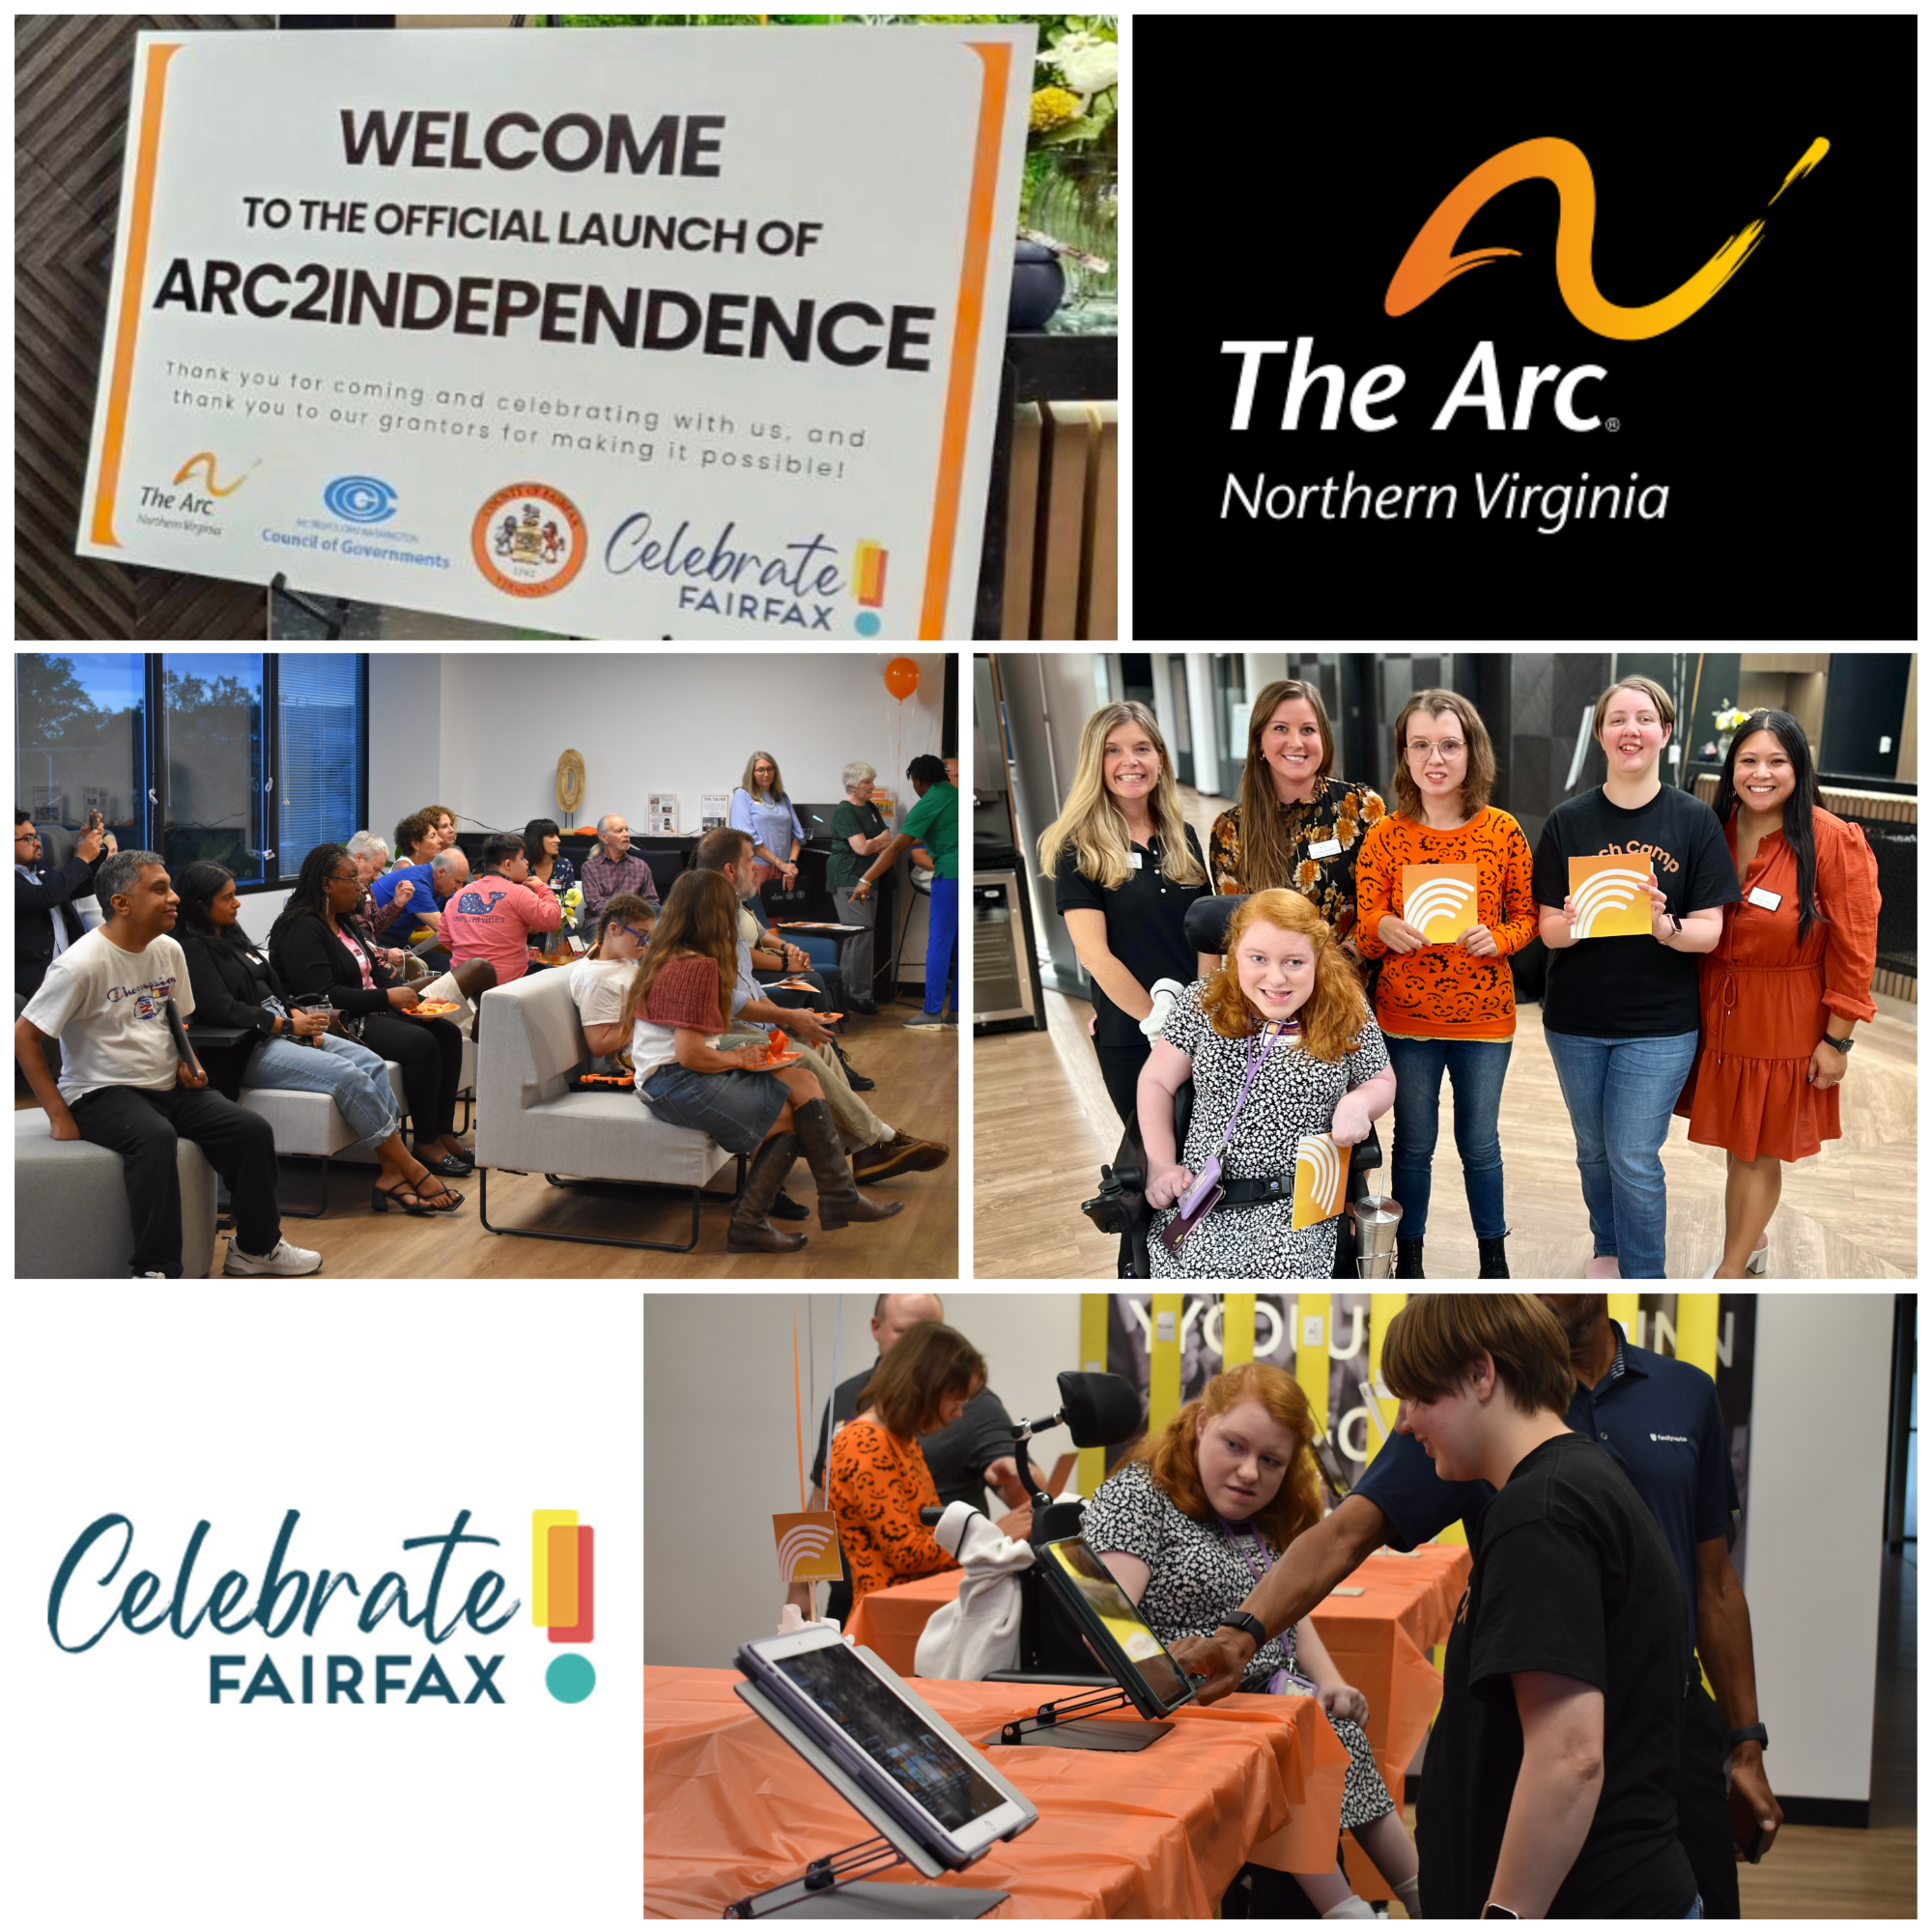 A collage of images from the Arc2Independence app launch party. The collage features logos from The Arc of Northern Virginia and Clebrate Fairfax.